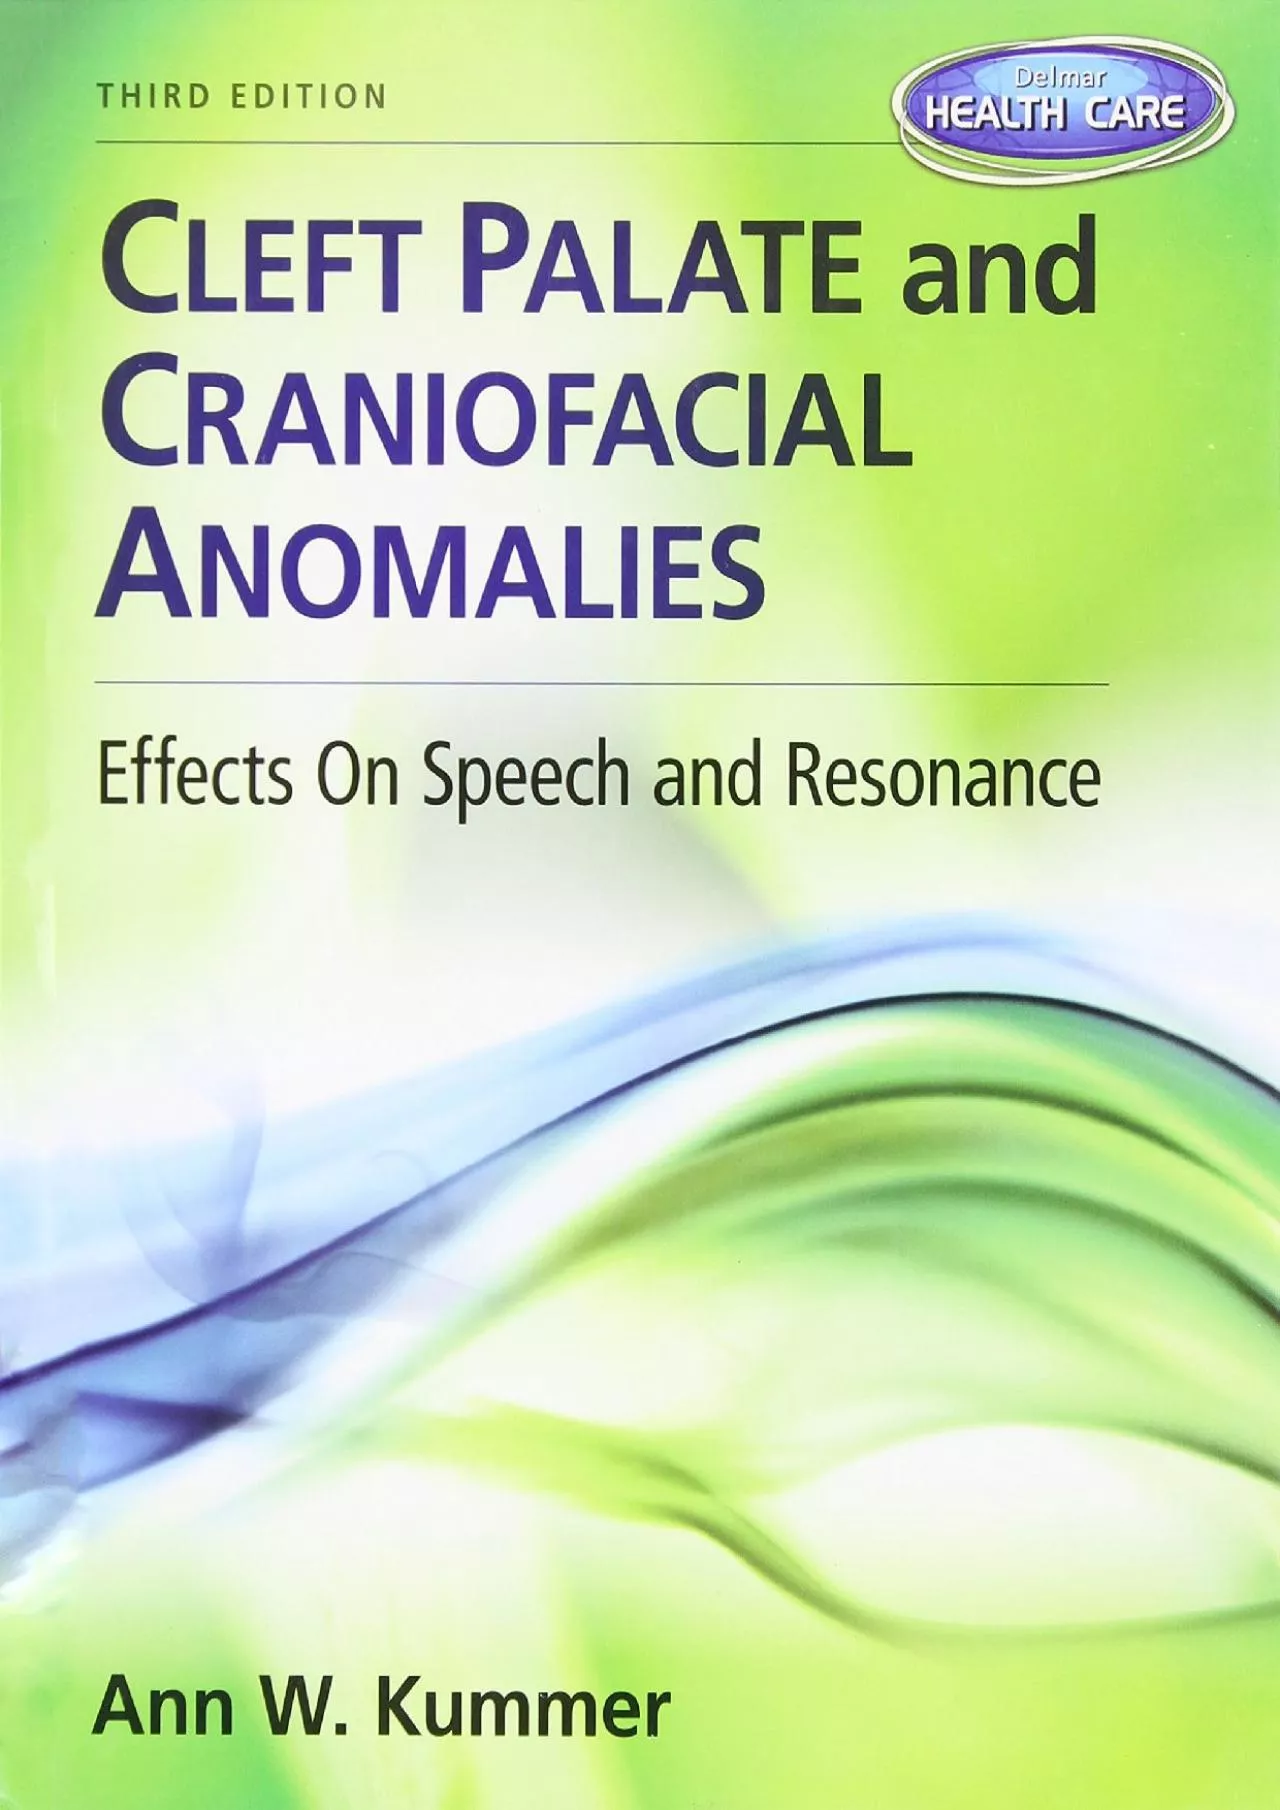 (DOWNLOAD)-Cleft Palate & Craniofacial Anomalies: Effects on Speech and Resonance (with